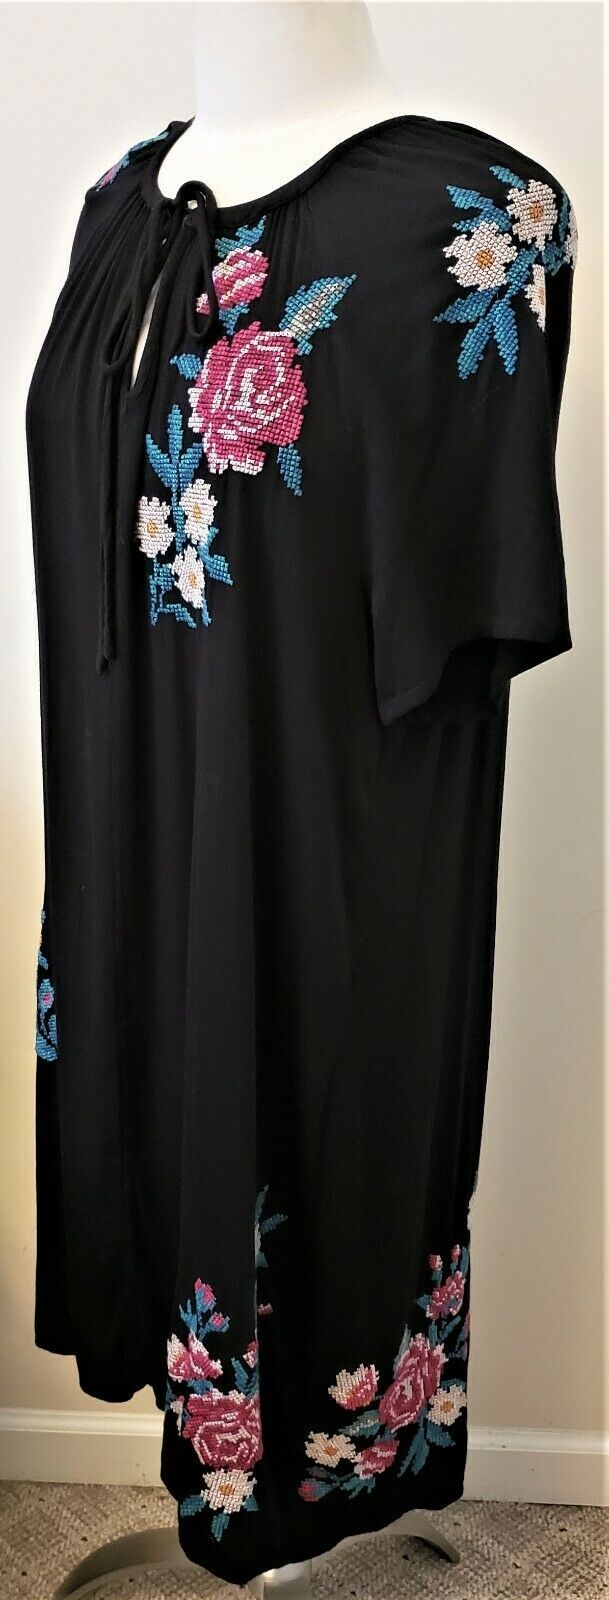 Primary image for Johnny Was Kari Drawstring Peasant Tunic Sz-M Black/Multicolor Floral Embroidery